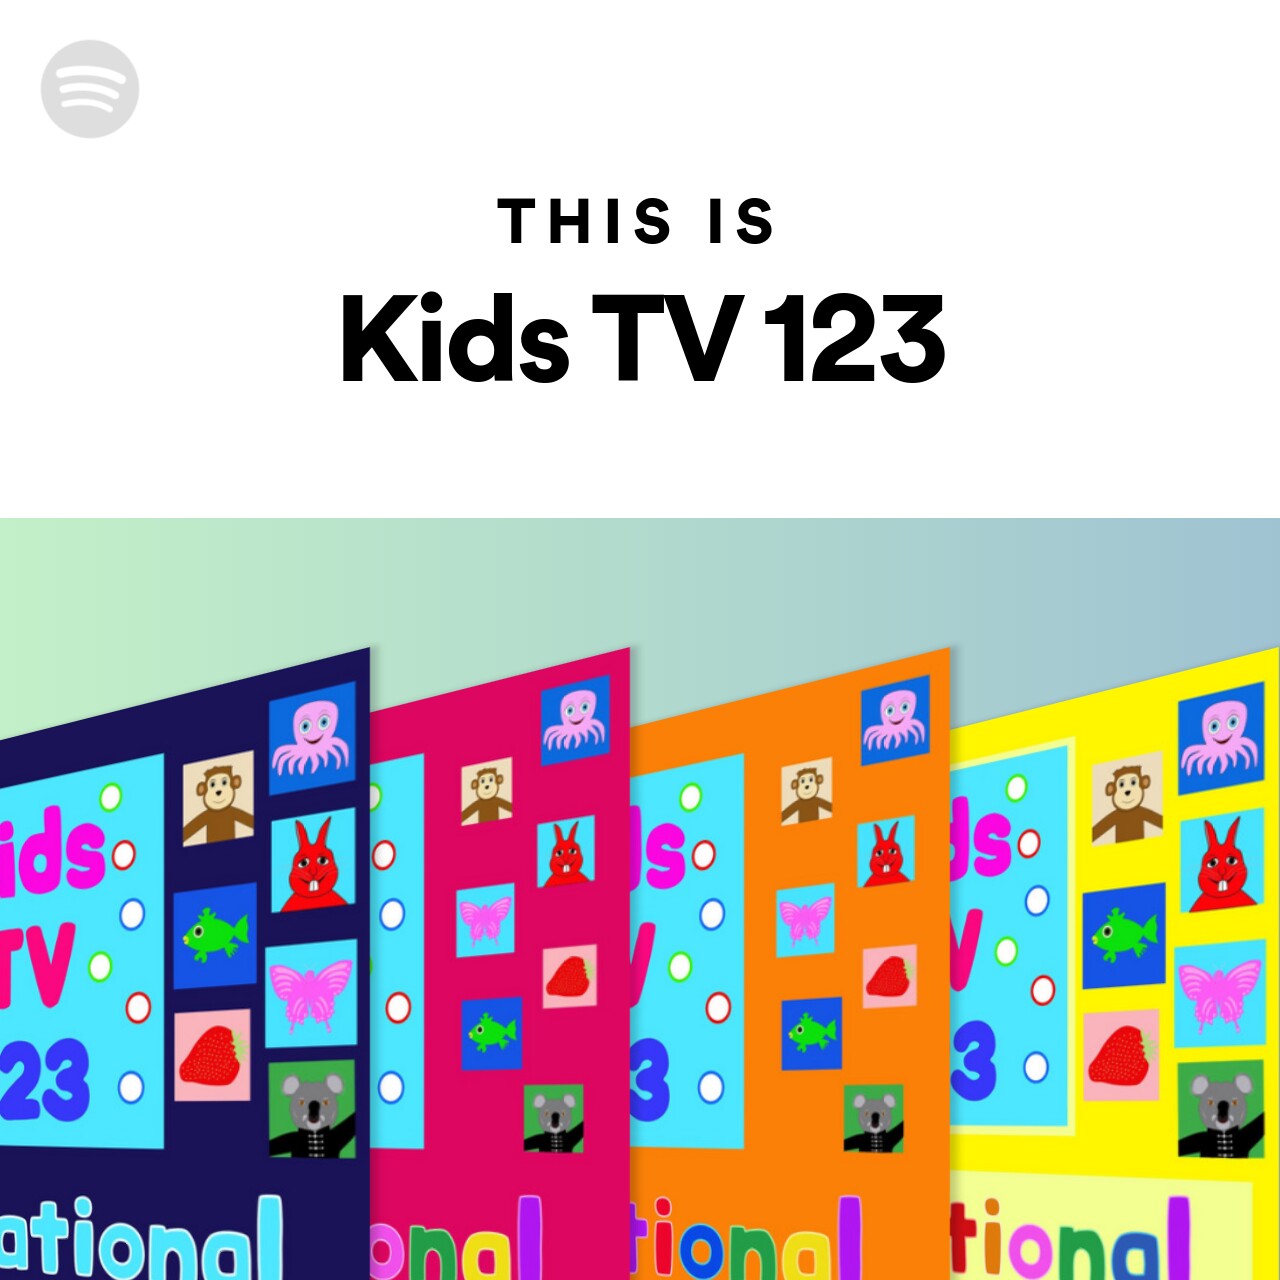 This Is Kids TV 123